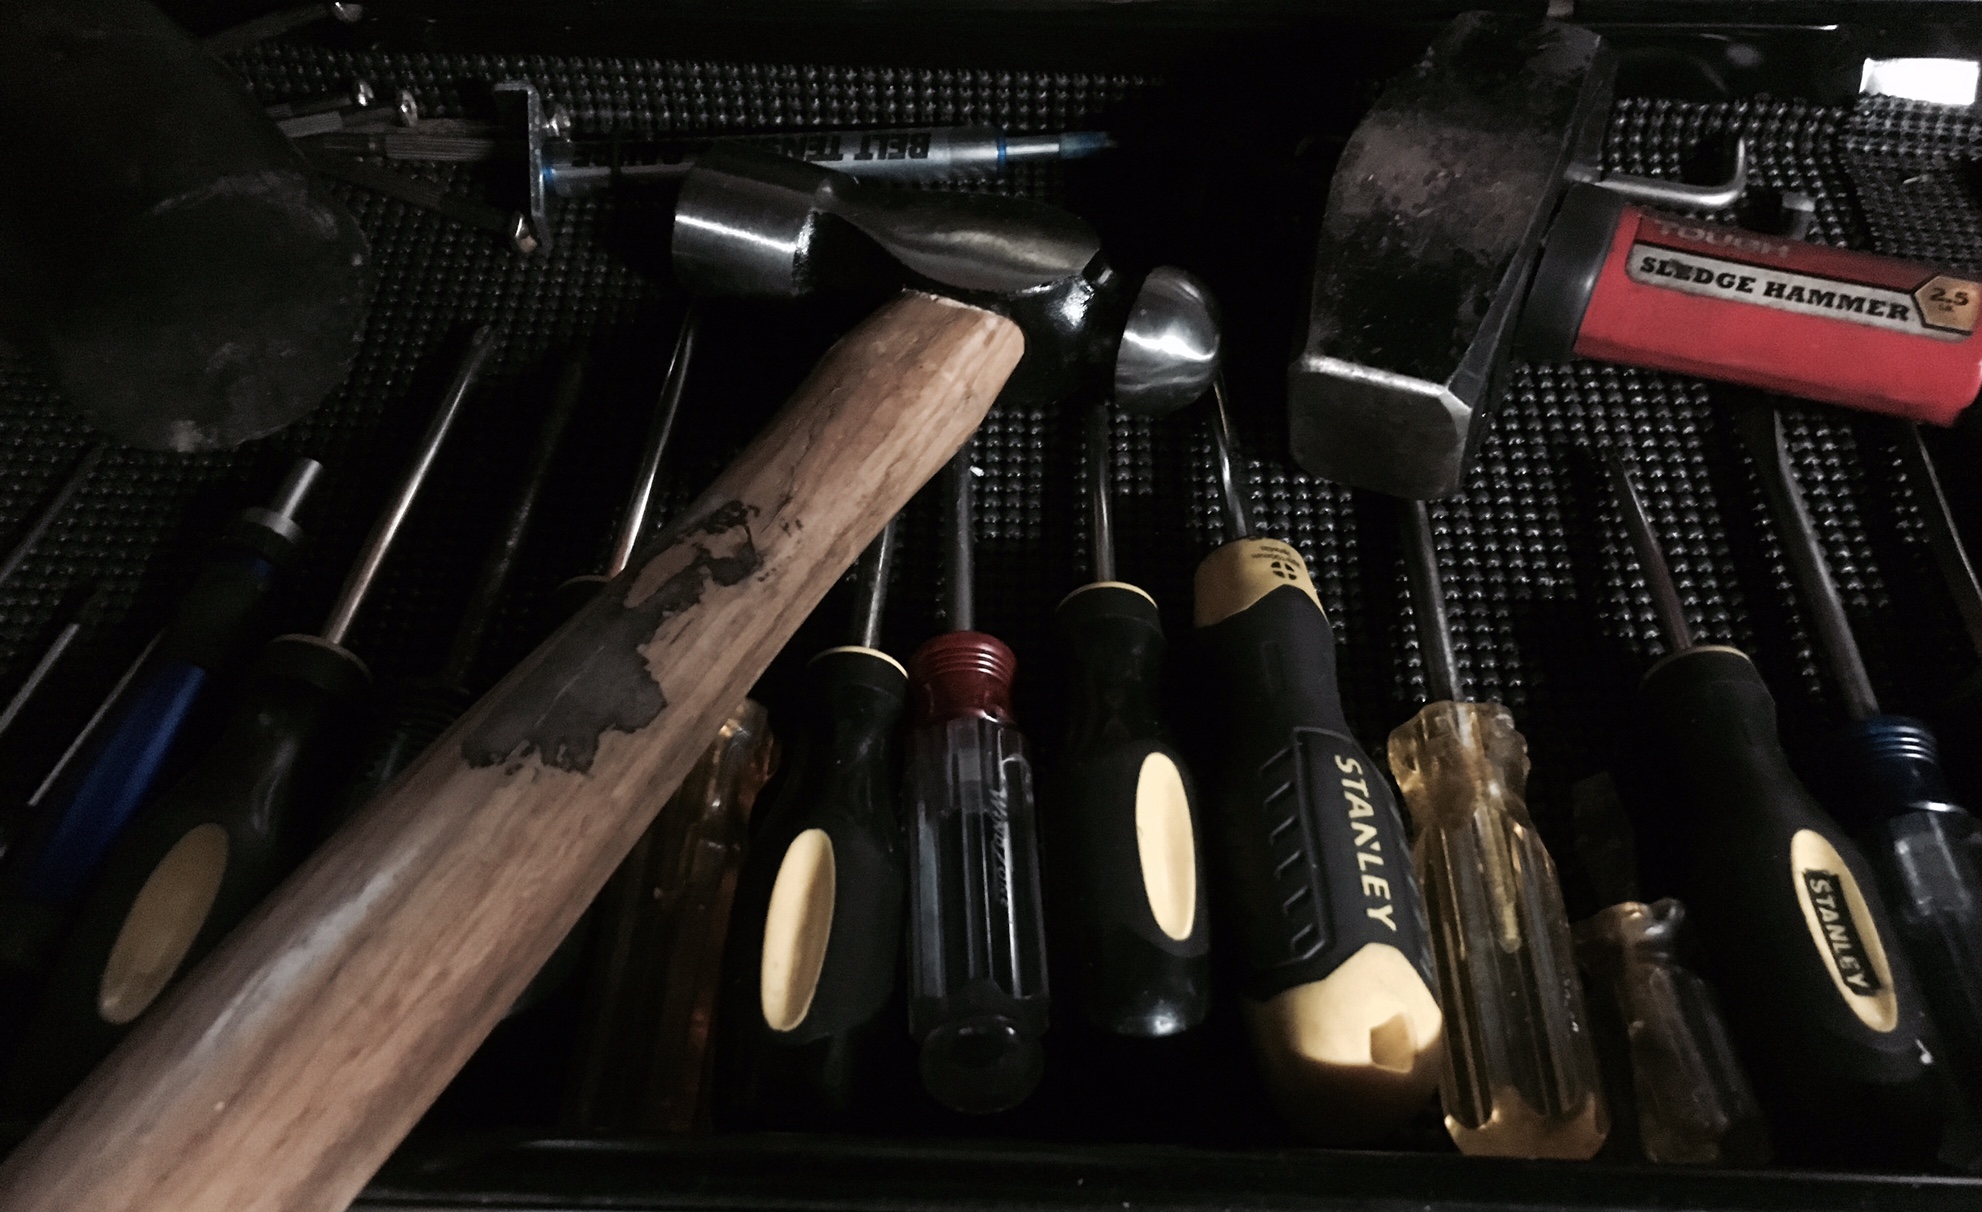 A picture of 3 hammers and multiple screwdrivers in a tool drawer